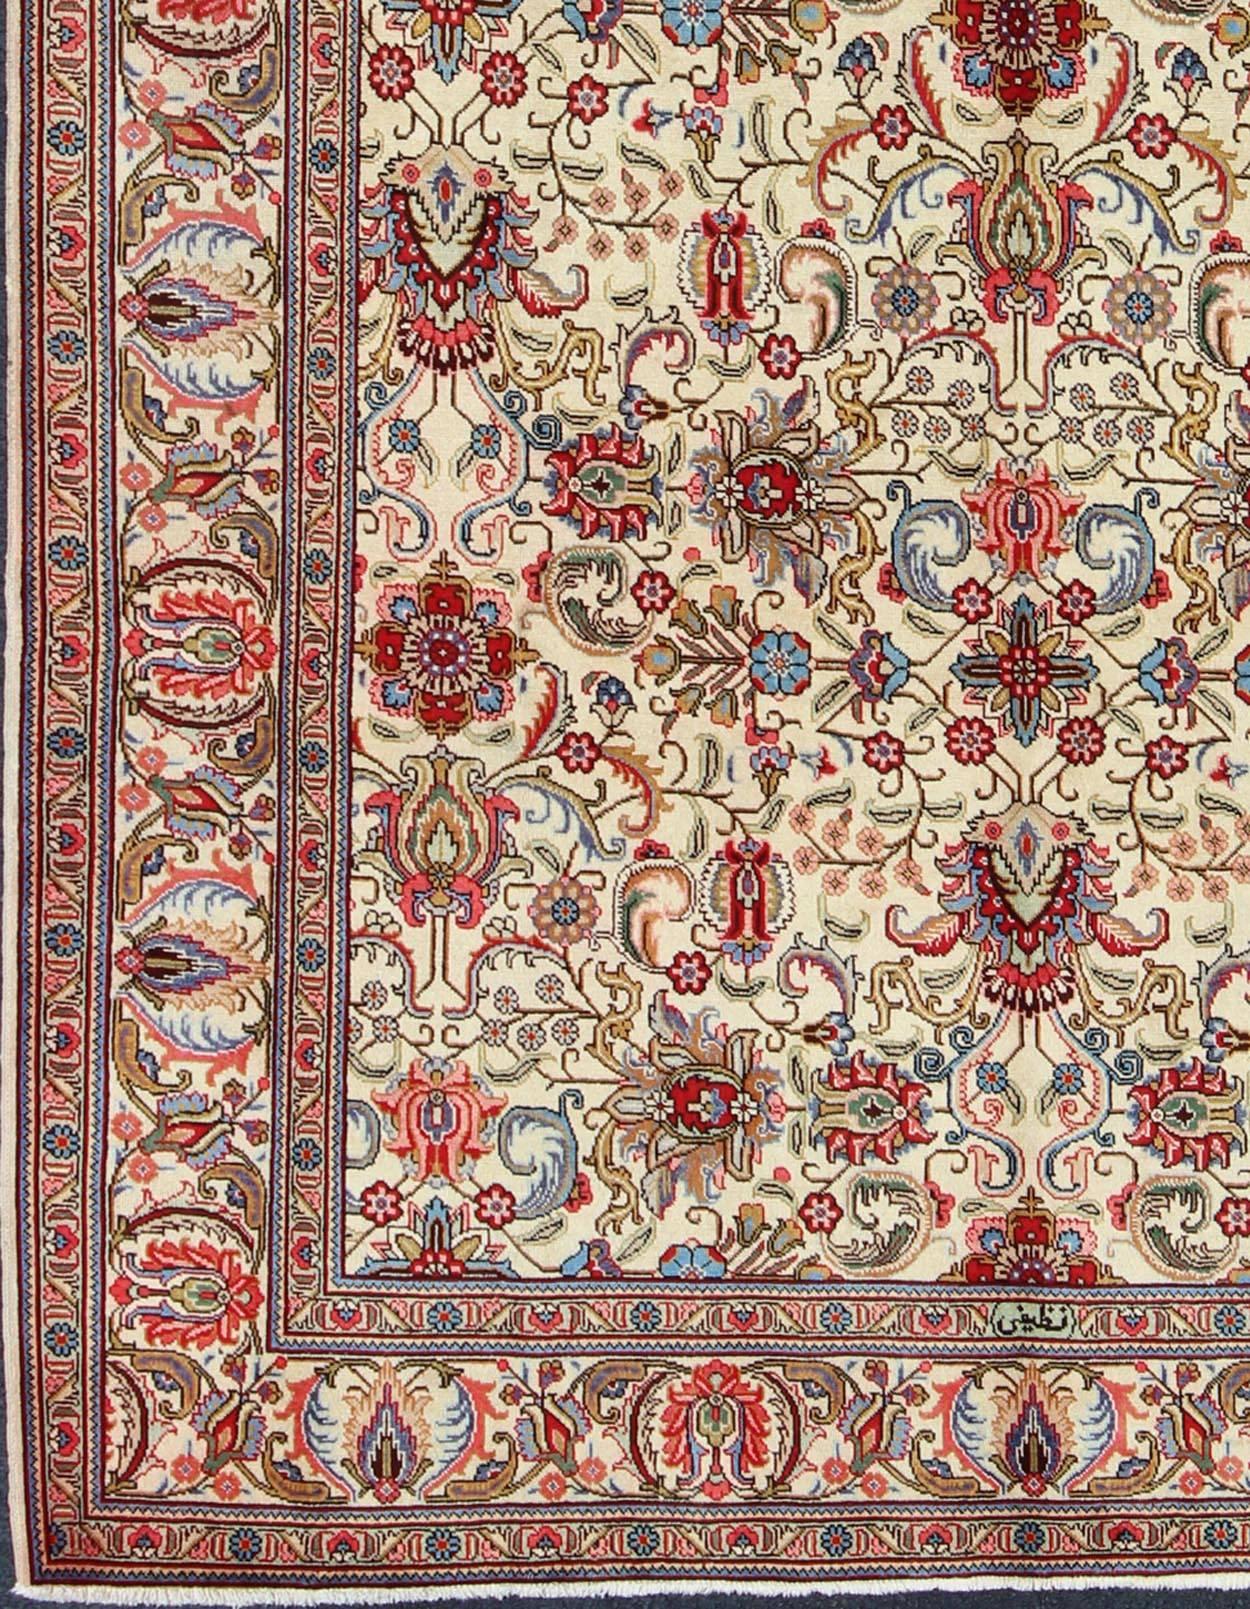 This Persian carpet features vivid, traditional colors and an all-over design set on an ivory background.
Measures: 8.4 x 11.8.